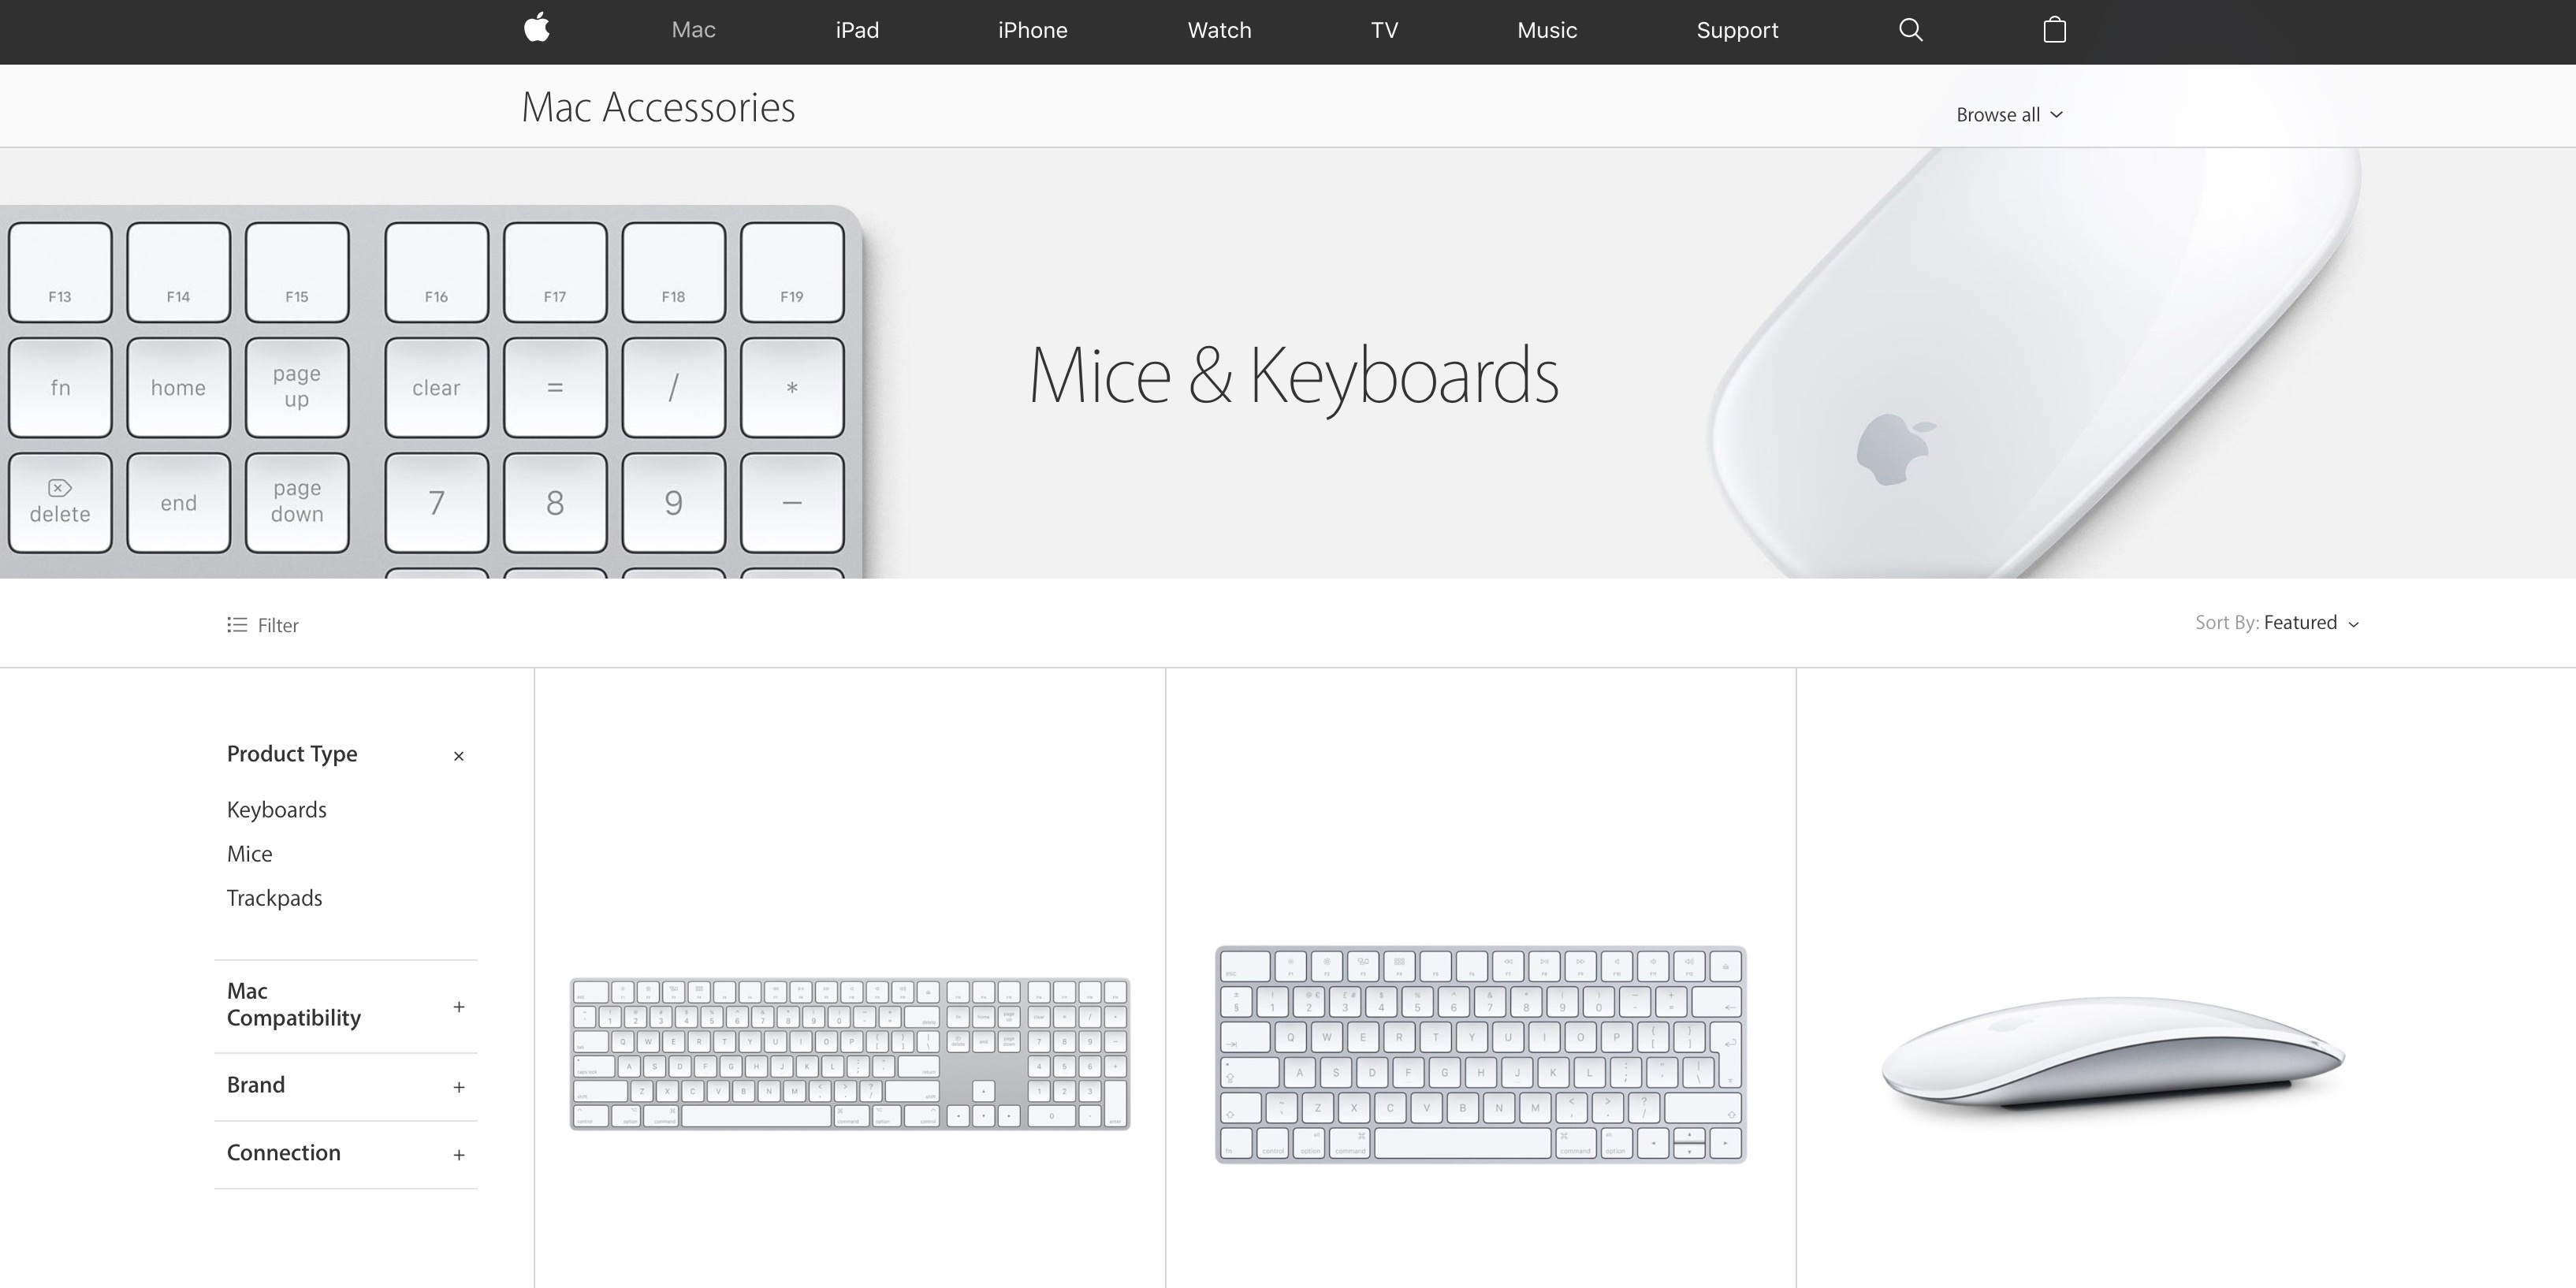 apple keyboard with numeric keypad not working